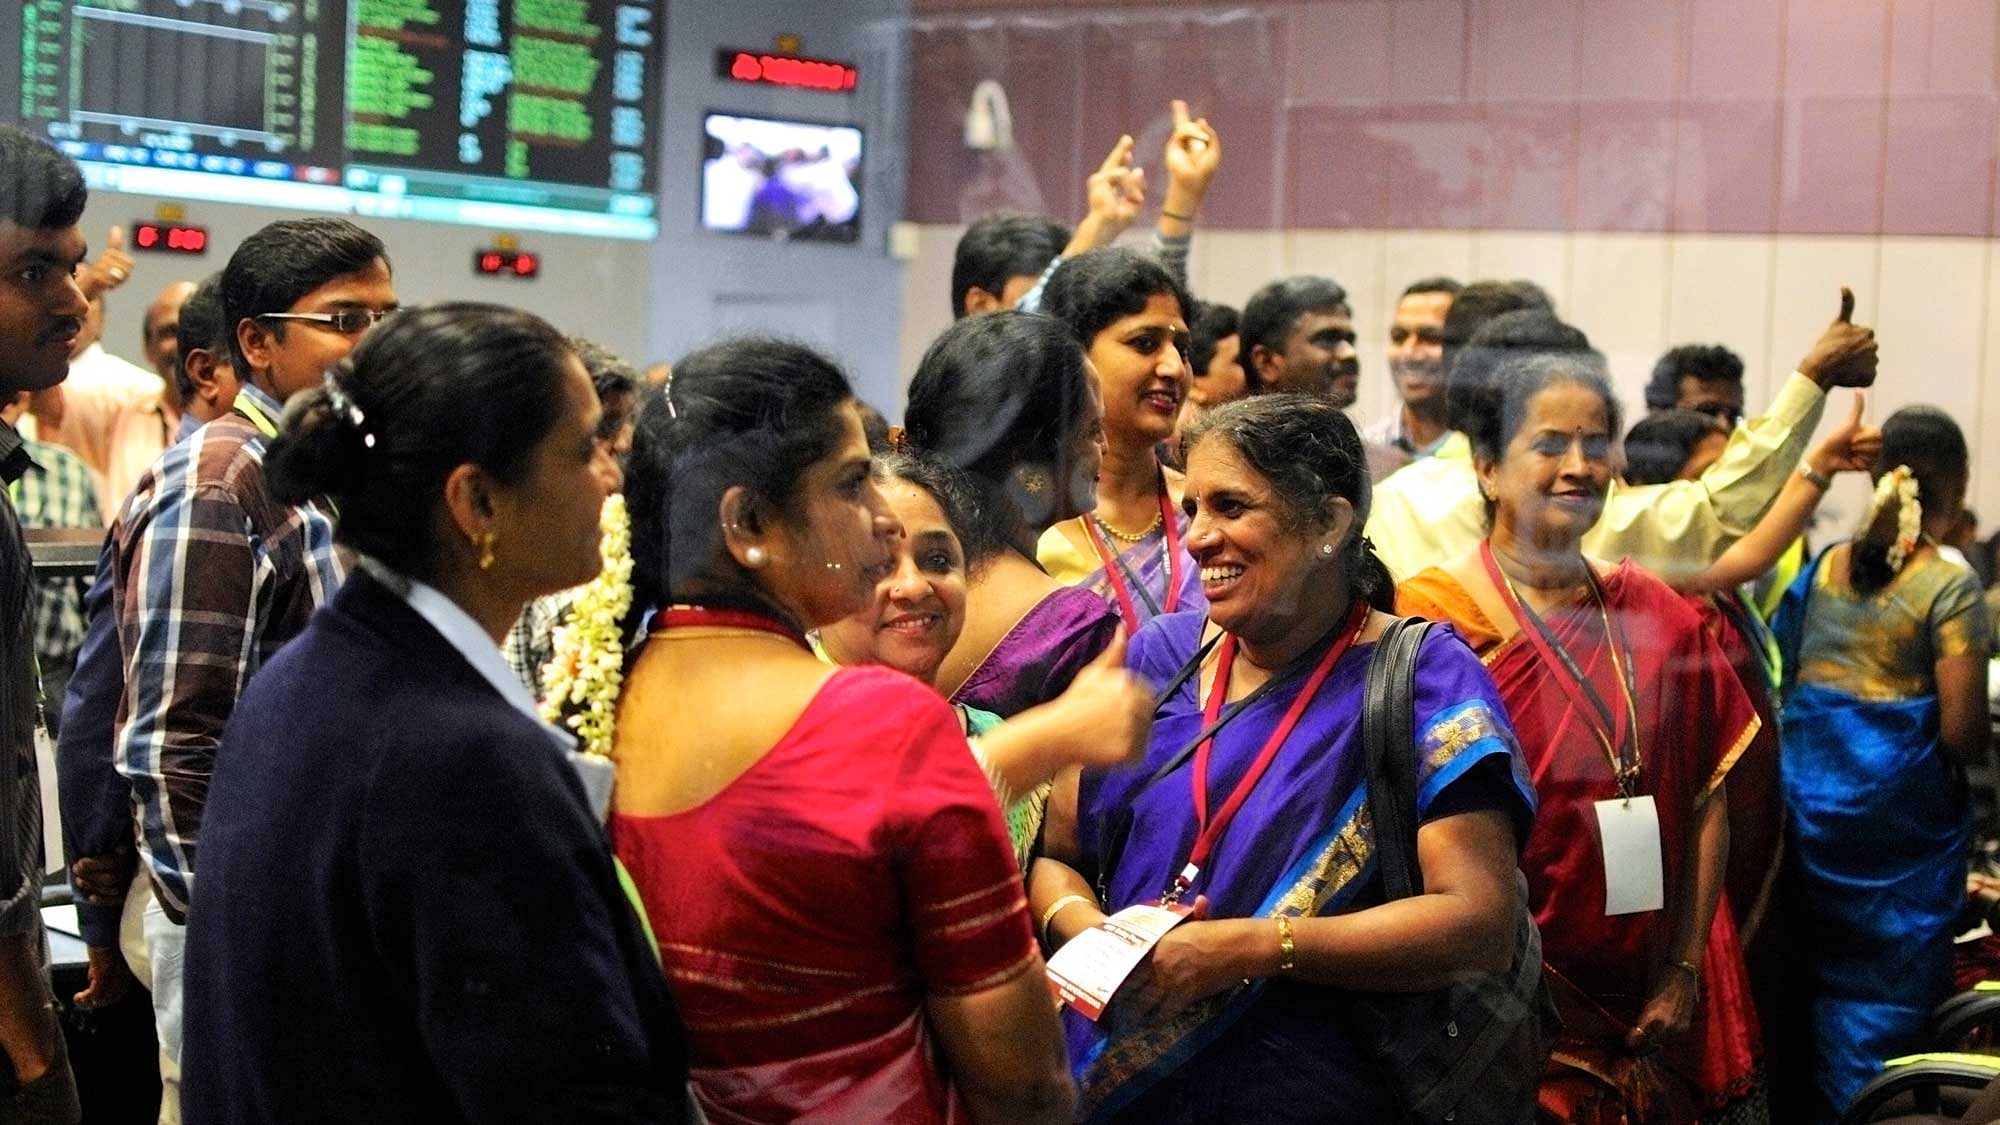 Indian Space Research Organization (ISRO) women scientists and engineers cheer after India’s Mars orbiter successfully entered the red planet’s orbit, at their Spacecraft Control Center, in this photo taken through a glass panel, in Bangalore on 24 September 2014. (Photo: Reuters)